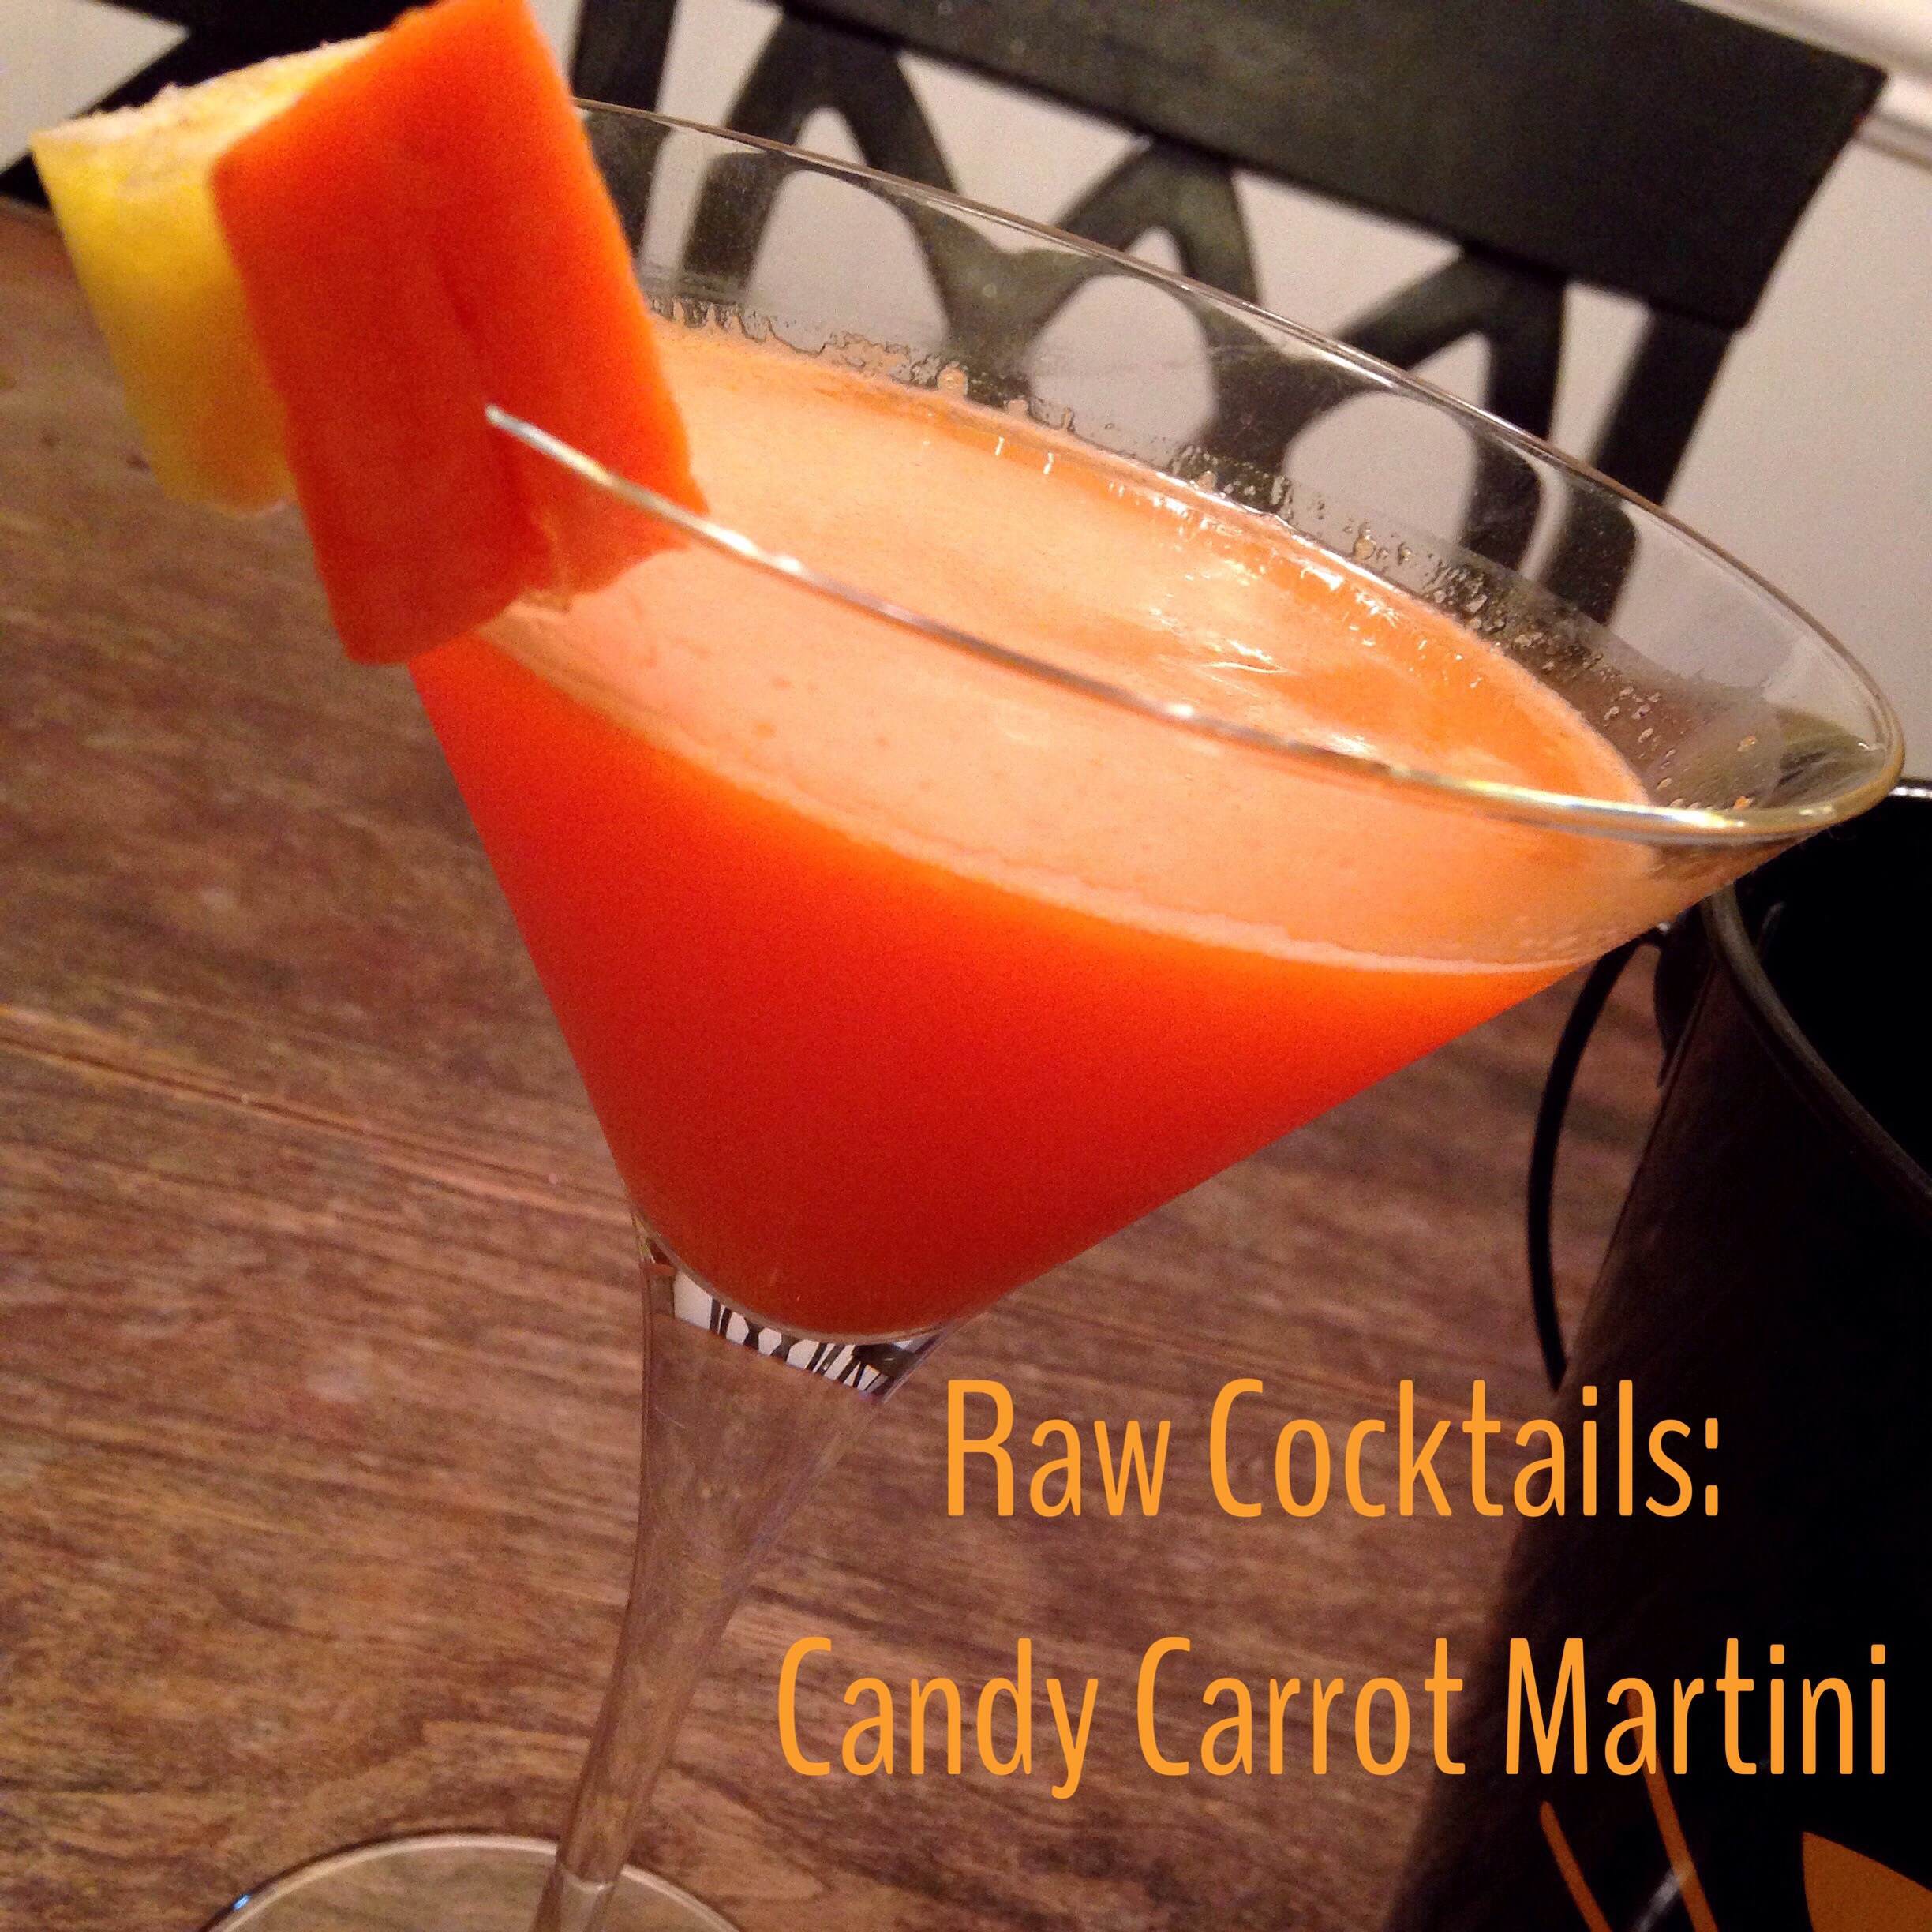 Raw Cocktails: Candy Carrot Martini